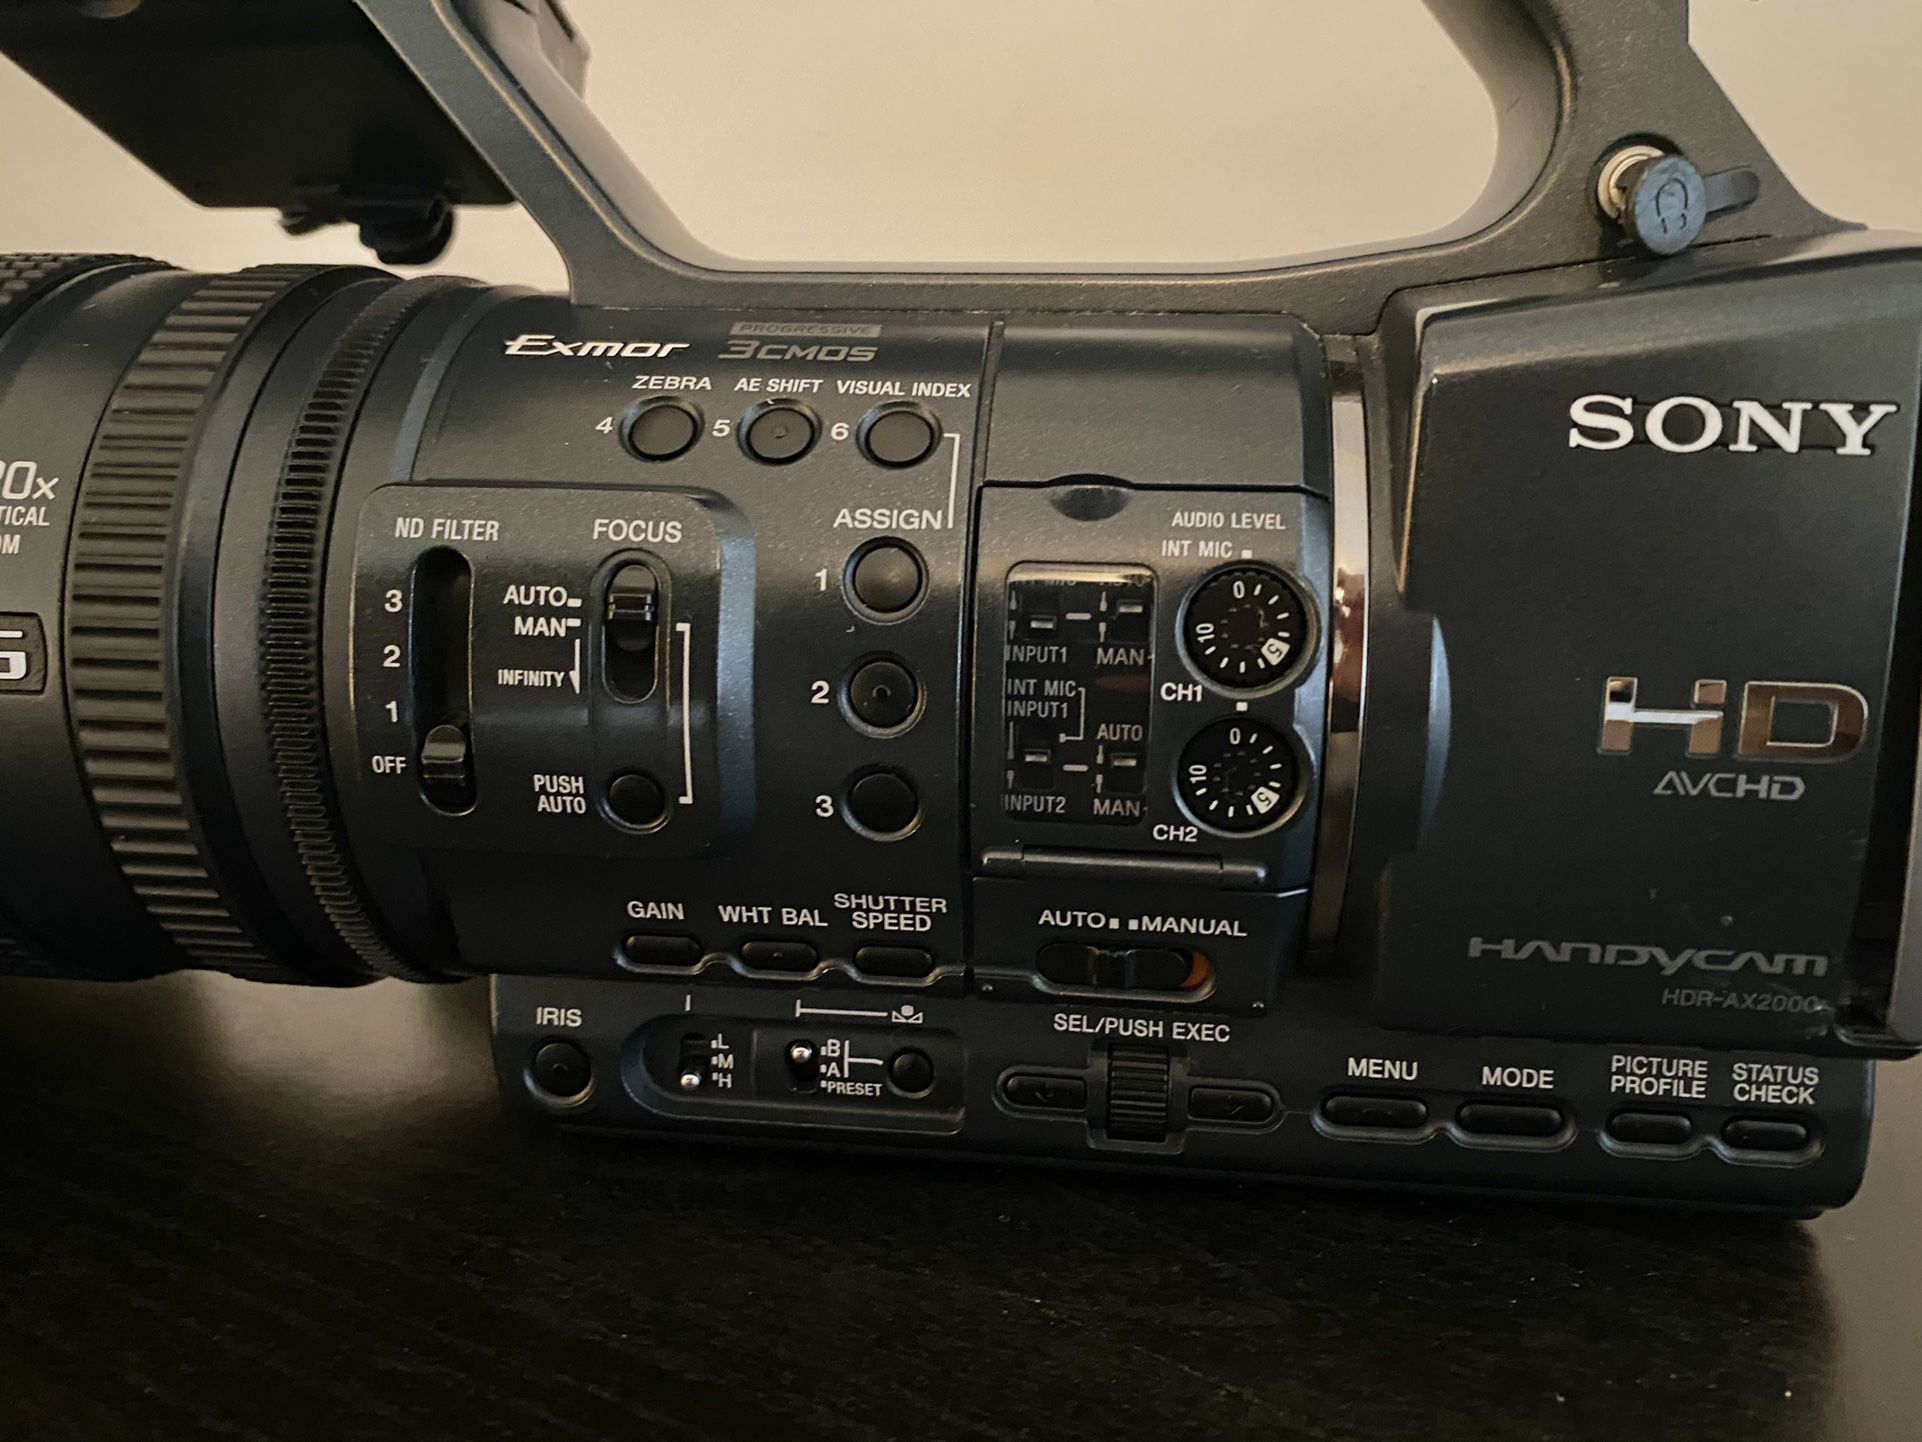  Sony HDR-AX2000  Comcorder with remote pcontrol + batteries